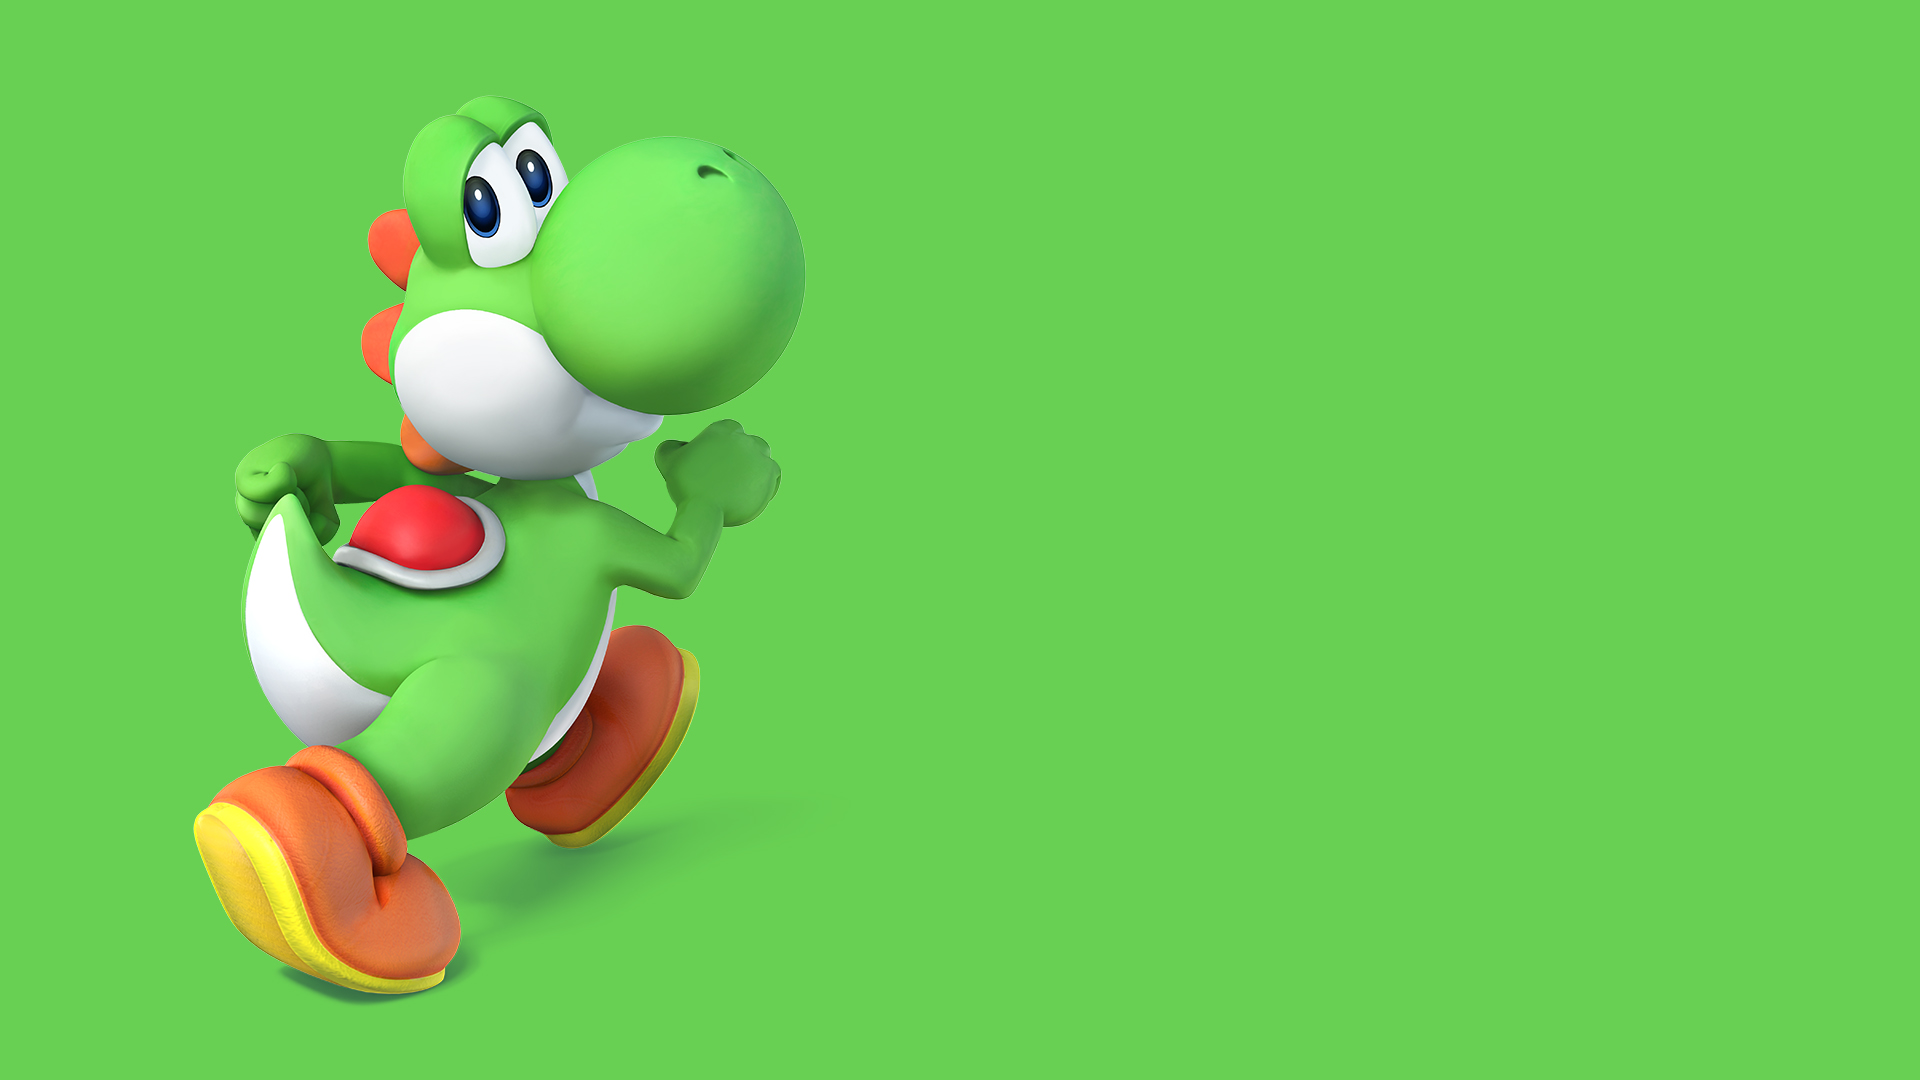 30 Fun And Awesome Facts About Yoshi - Tons Of Facts